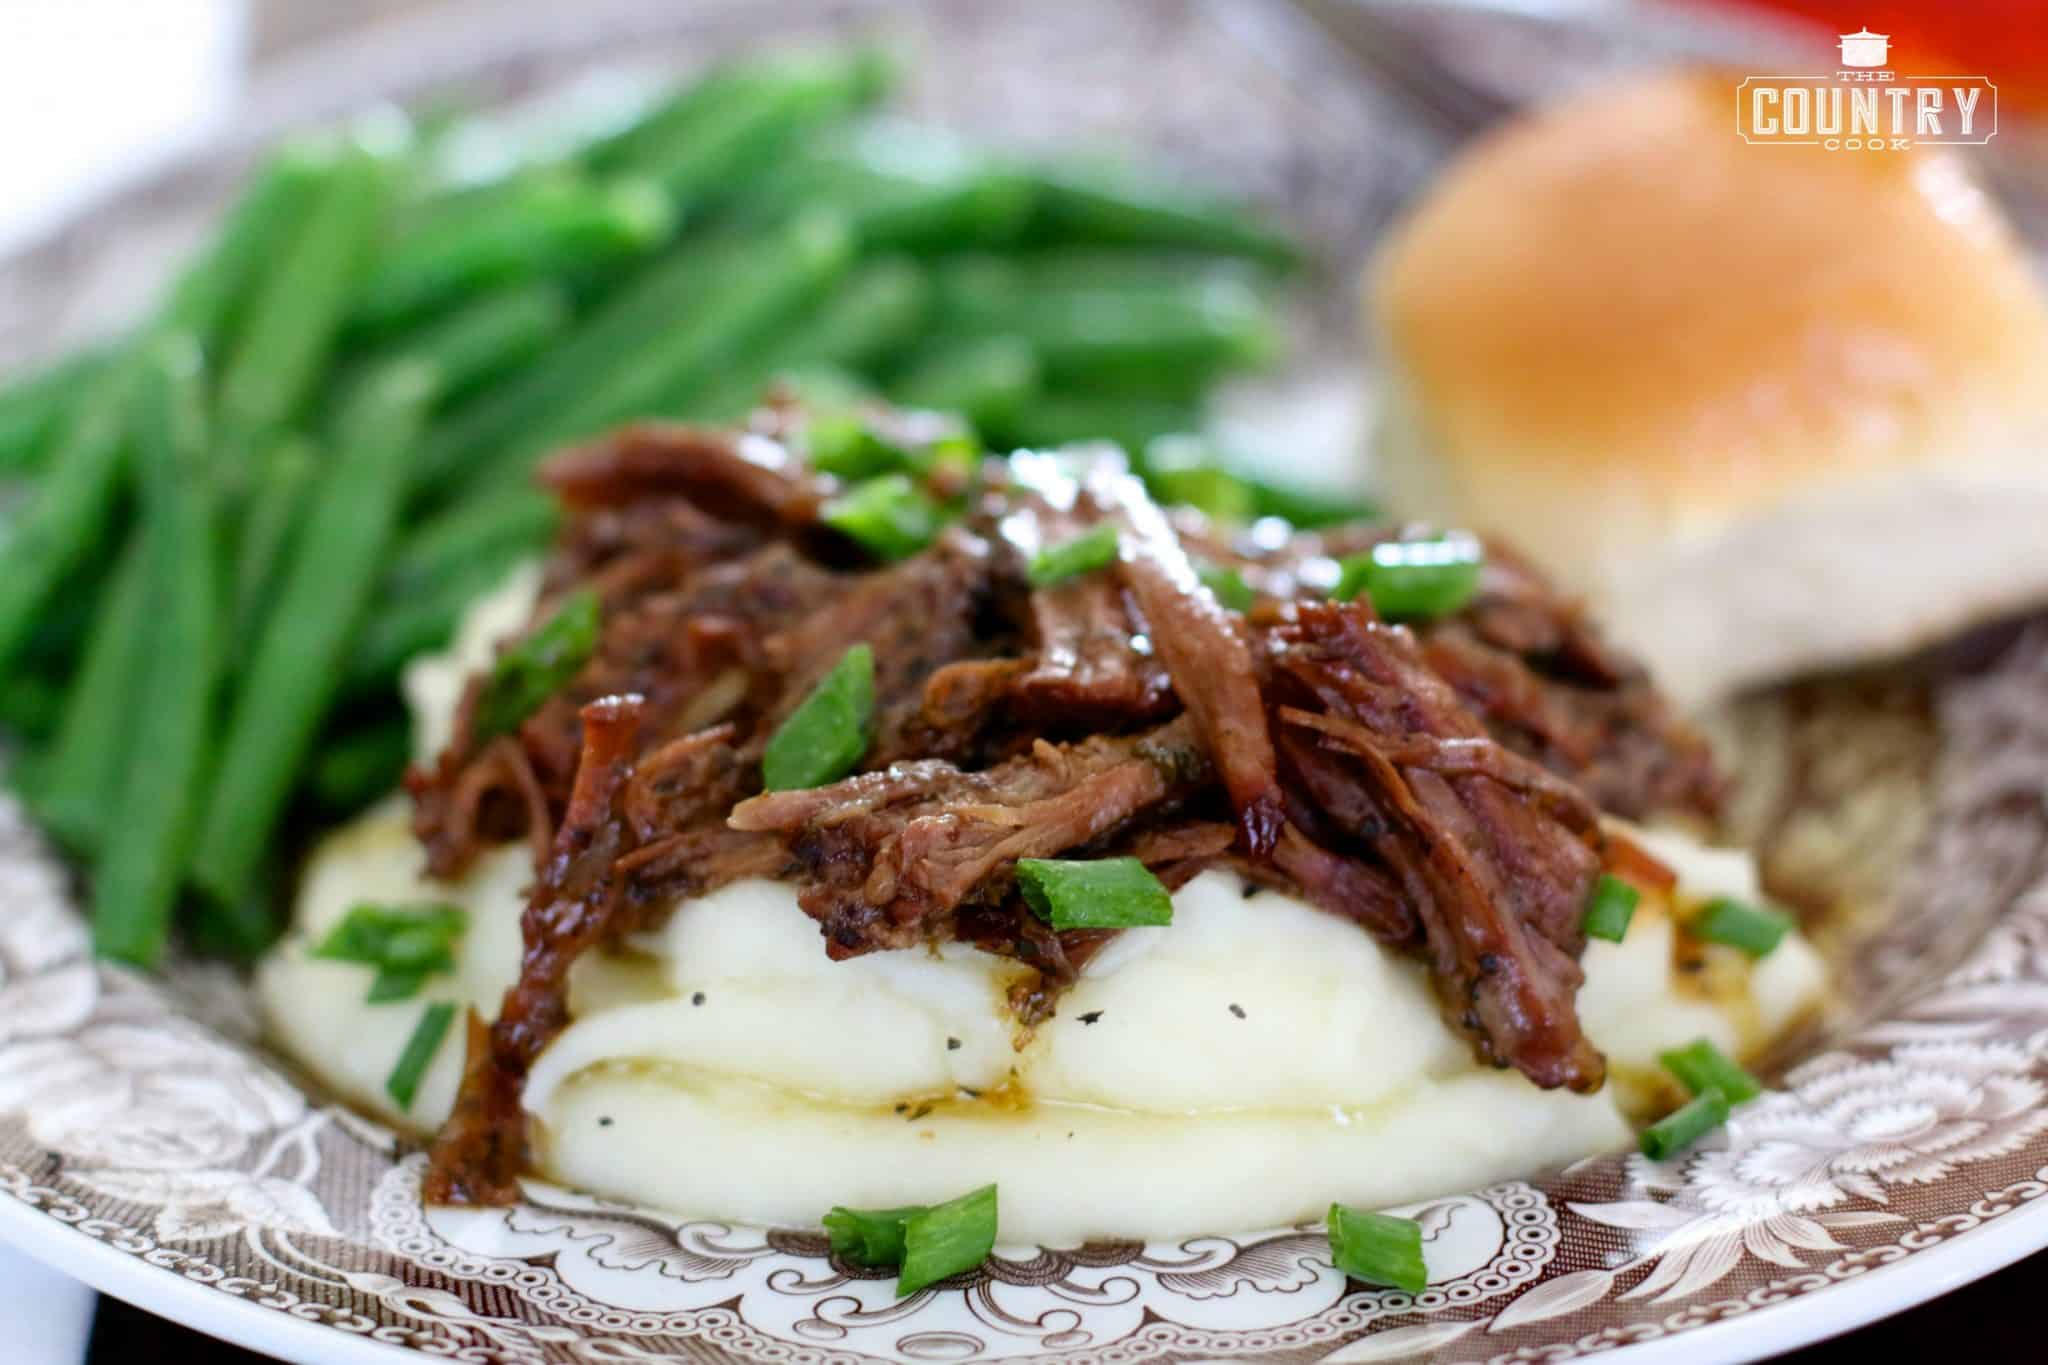 a serving of shredded pot roast on a pile of mashed potatoes with a side of green beans and a roll.